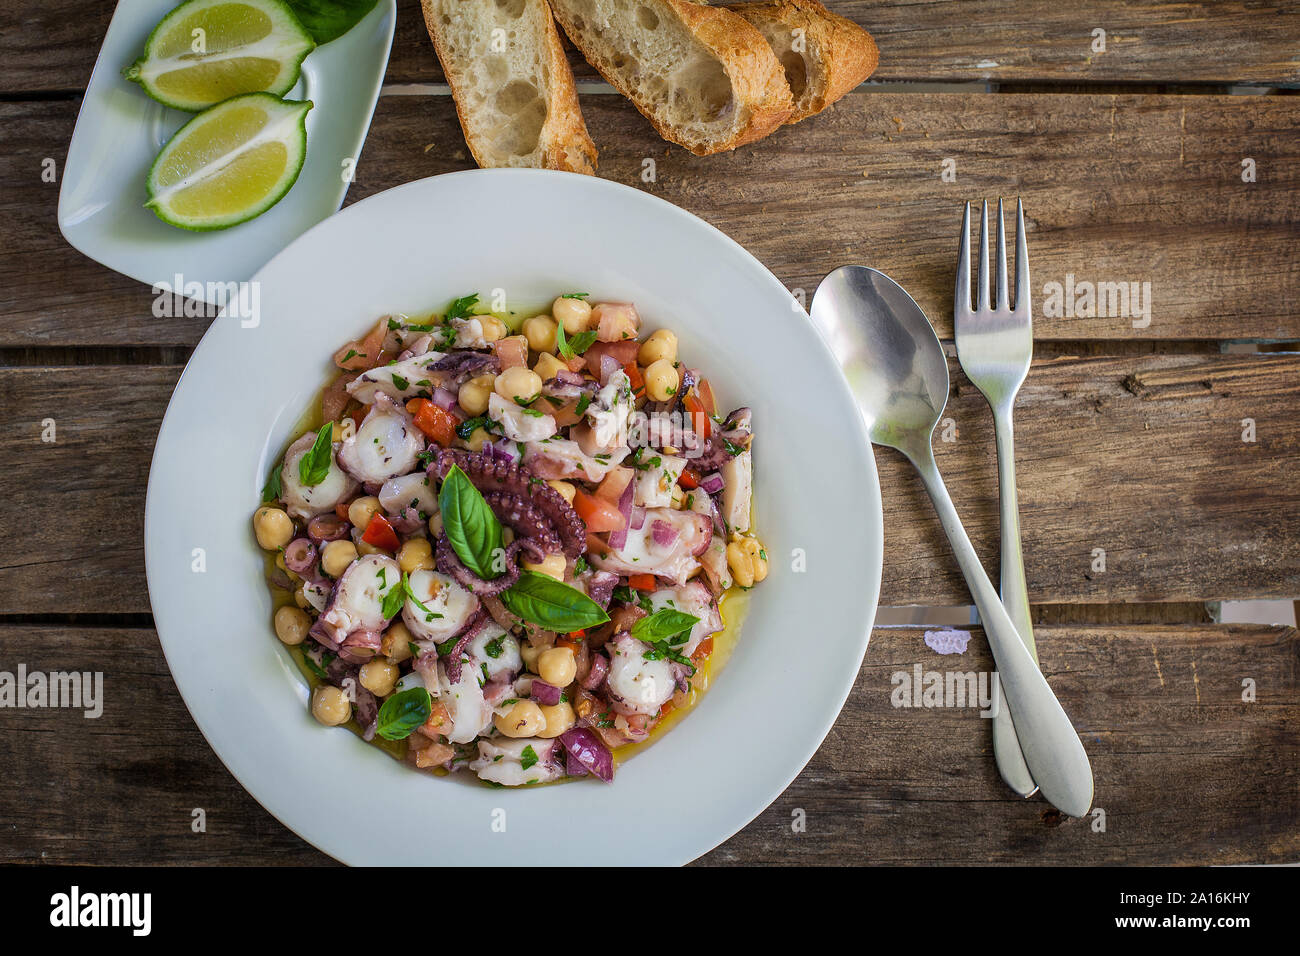 healthy octopus and chickpeas salad with veggies Stock Photo